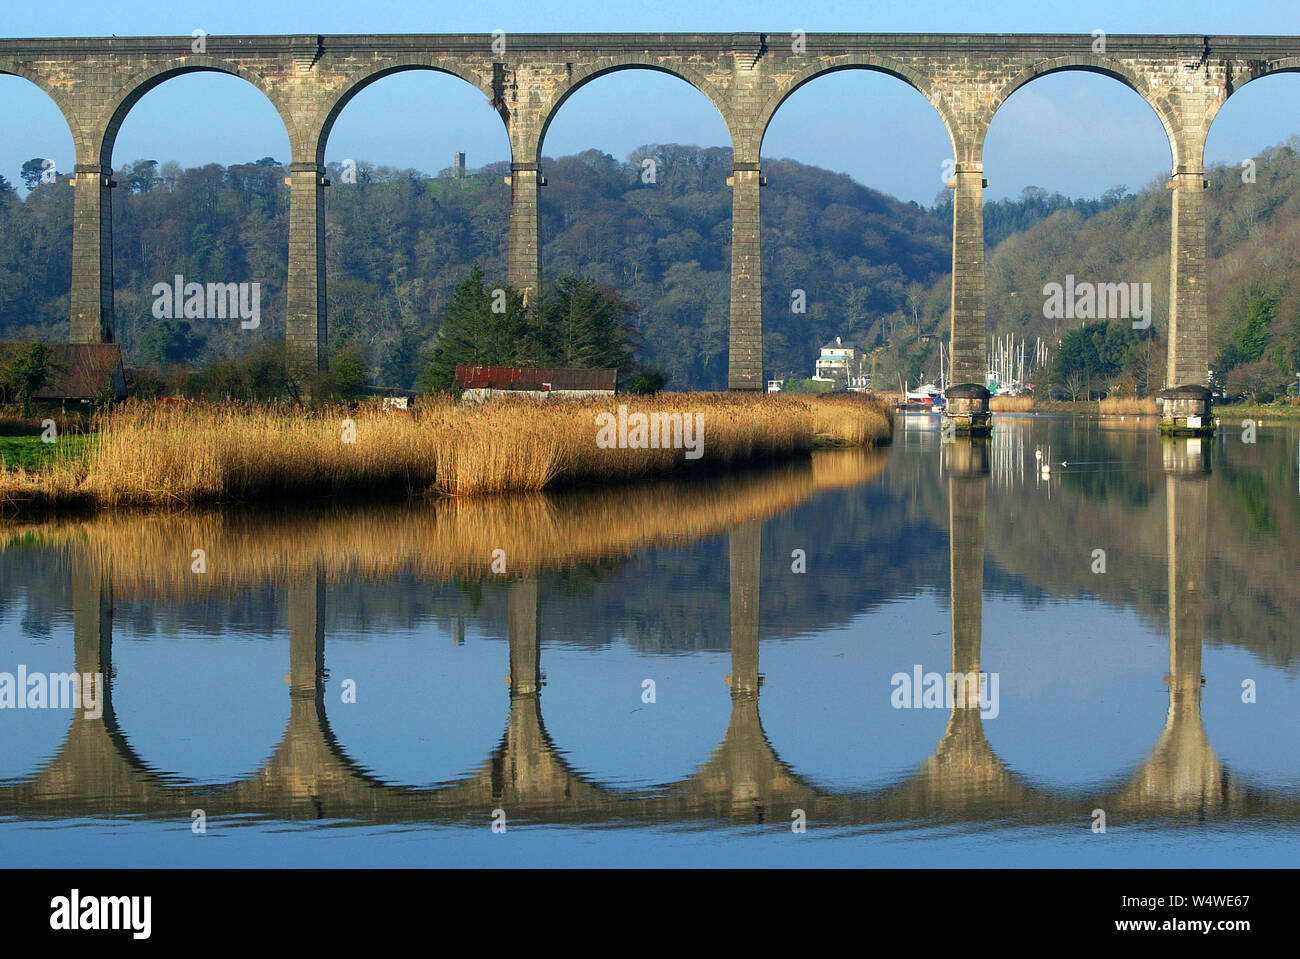 27.01.2004 - The railway viaduct that links Devon to Cornwall across the River Tamar at Calstock, Cornwall, UK. Stock Photo